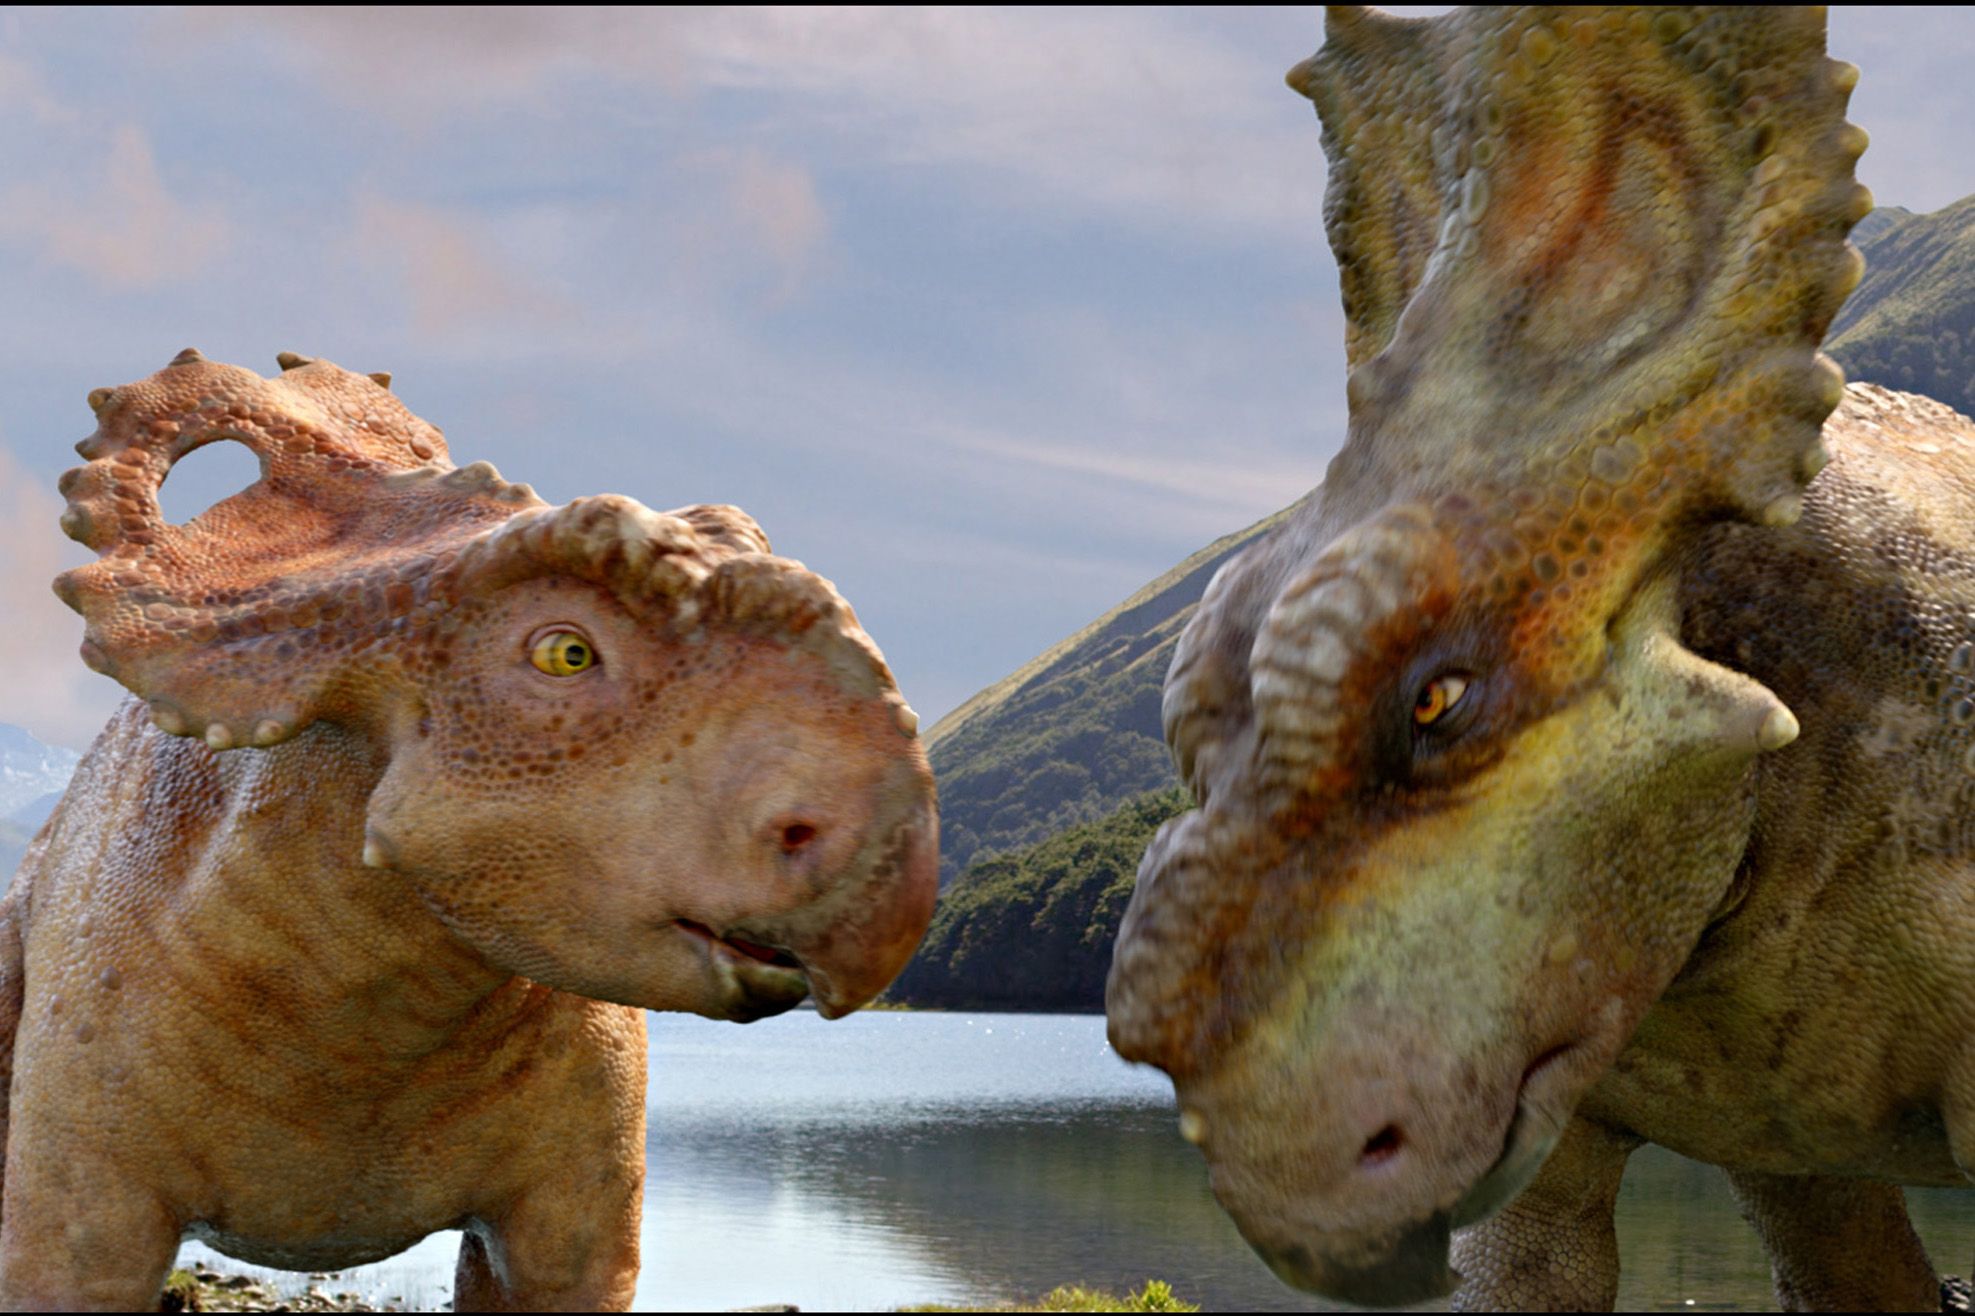 Walking With Dinosaurs wallpaper, Movie, HQ Walking With